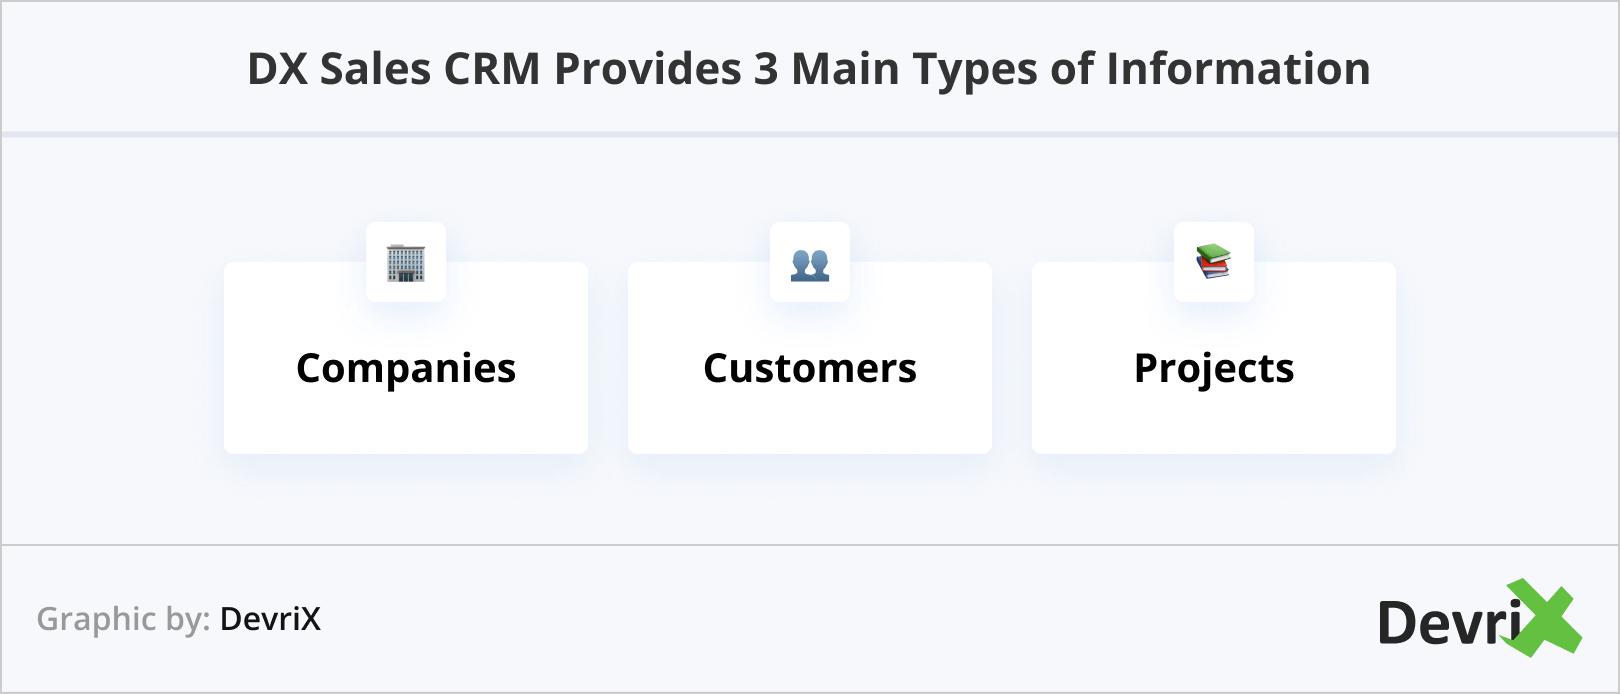 DX Sales CRM Provides 3 Main Types of Information